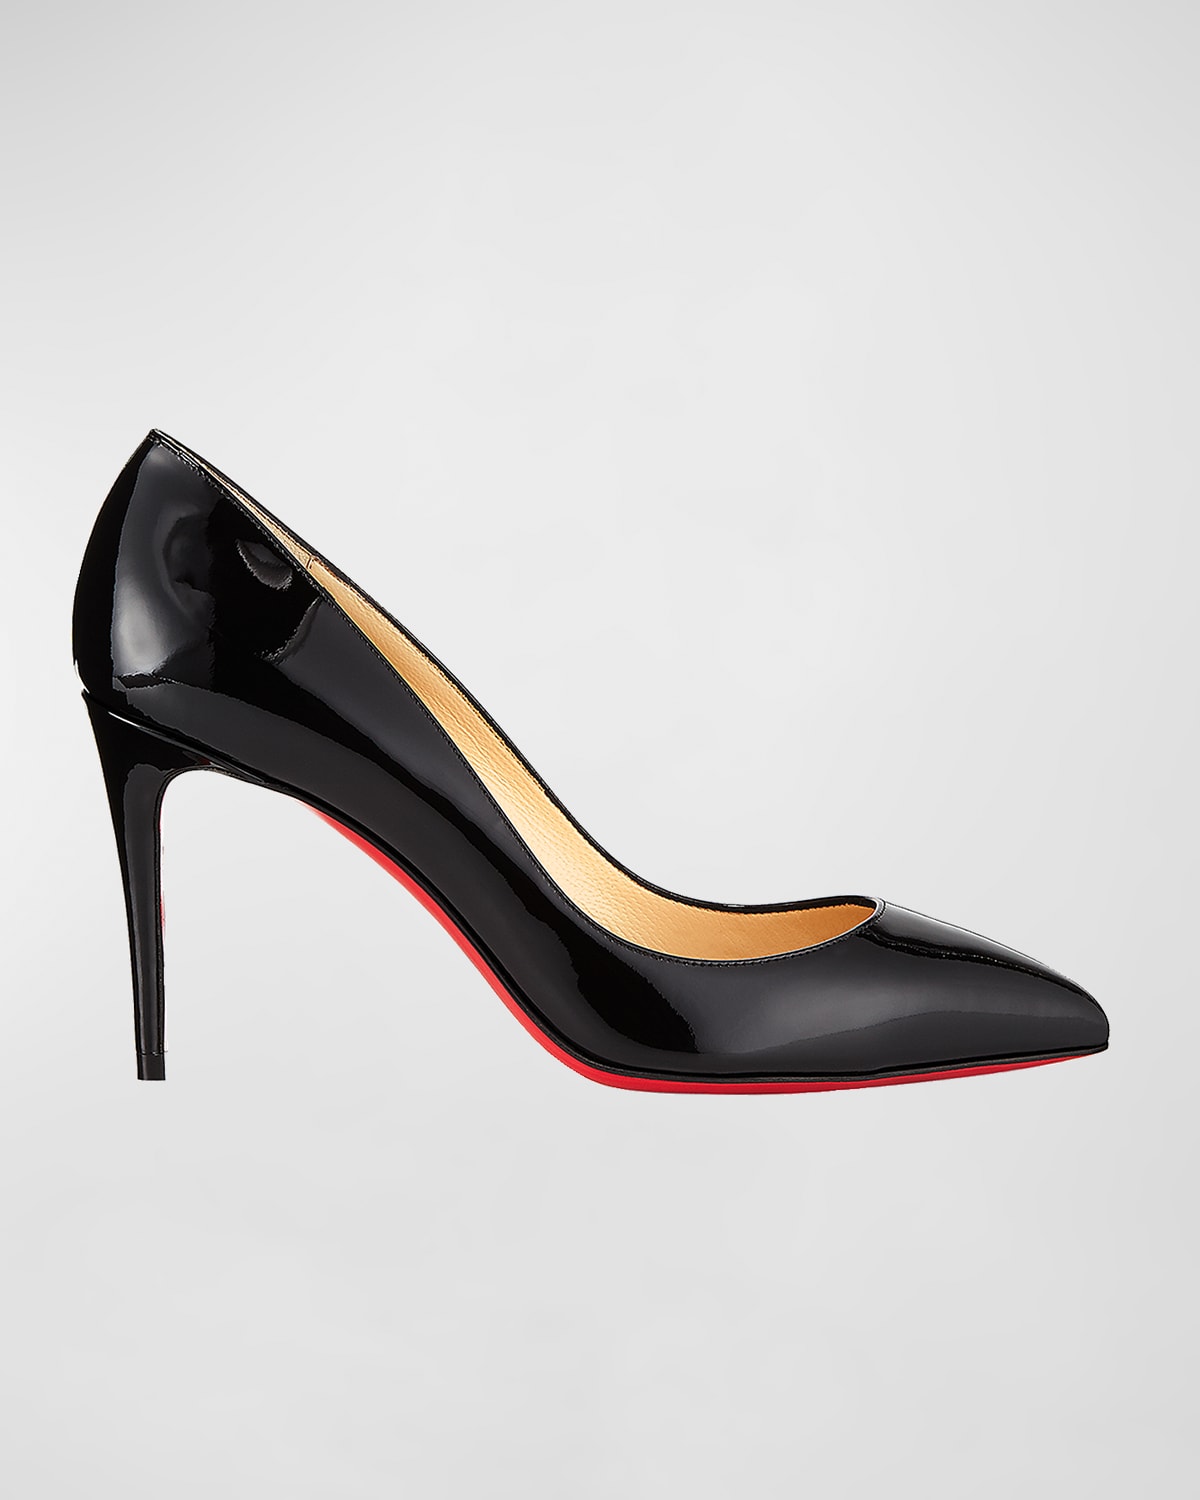 Louboutin Pigalle Follies 85mm Patent Red Sole Pumps Neiman Marcus